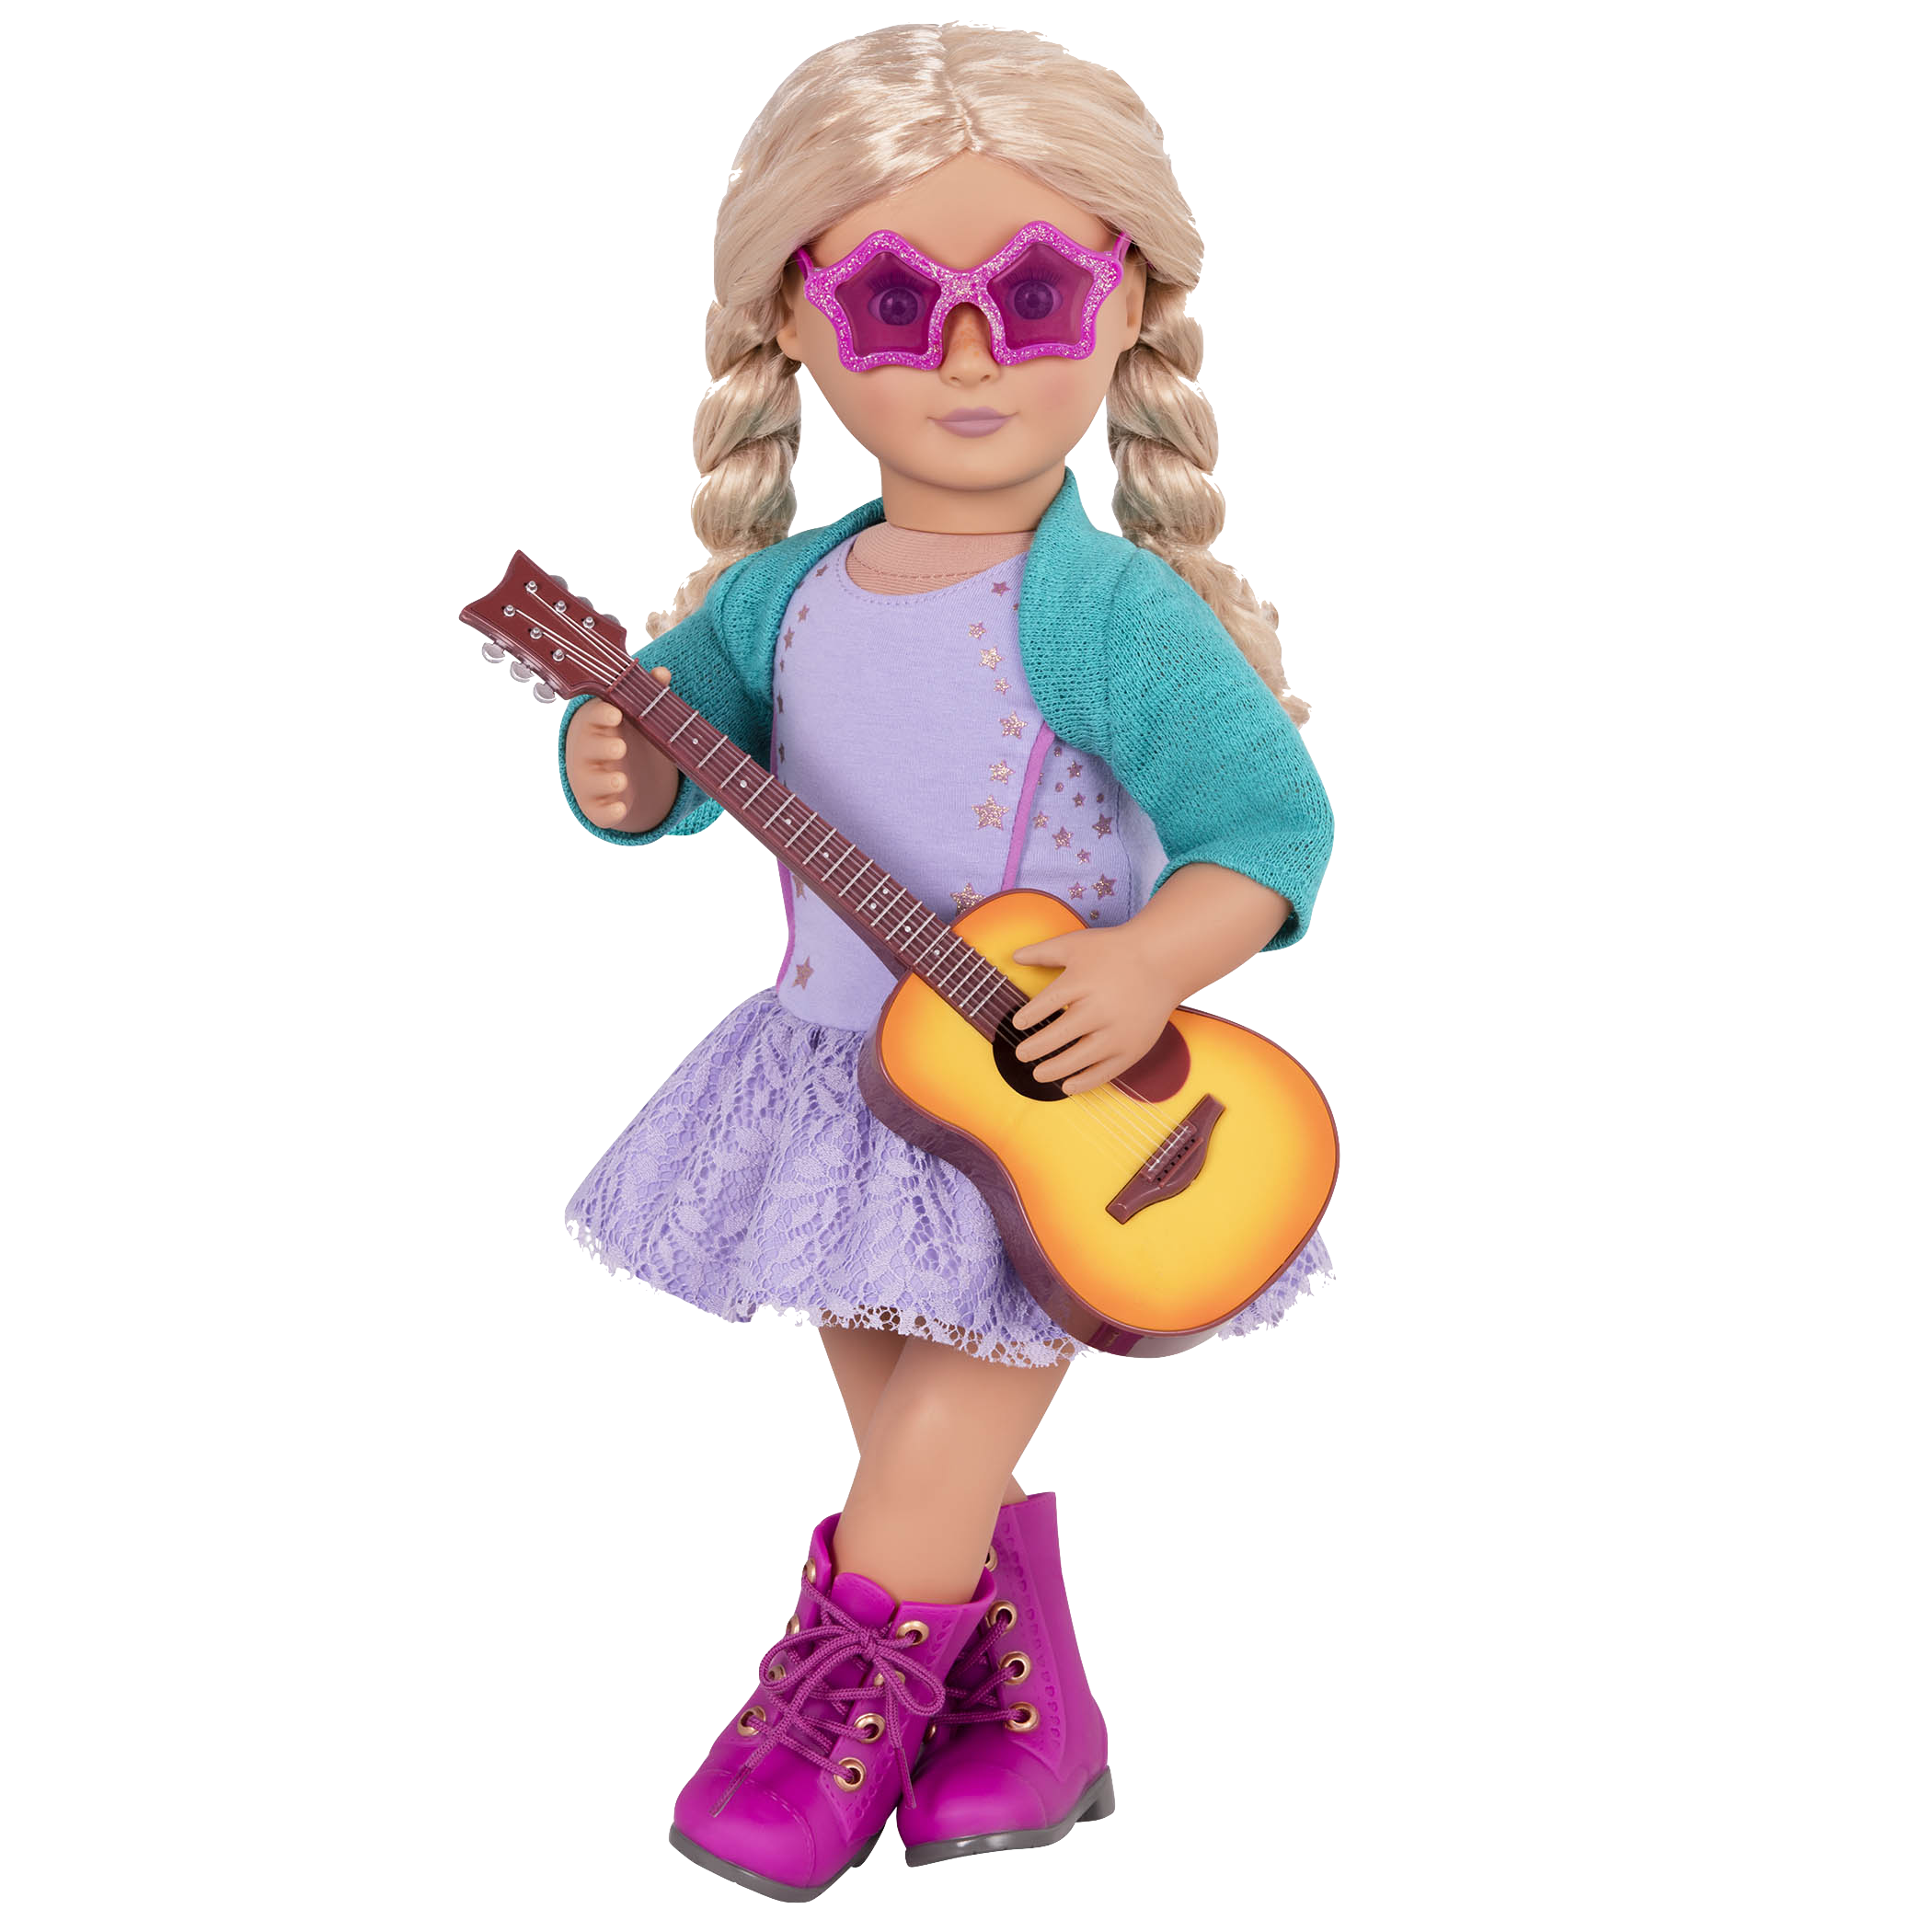 Coral wearing Melodies and Memories outfit and sunglasses